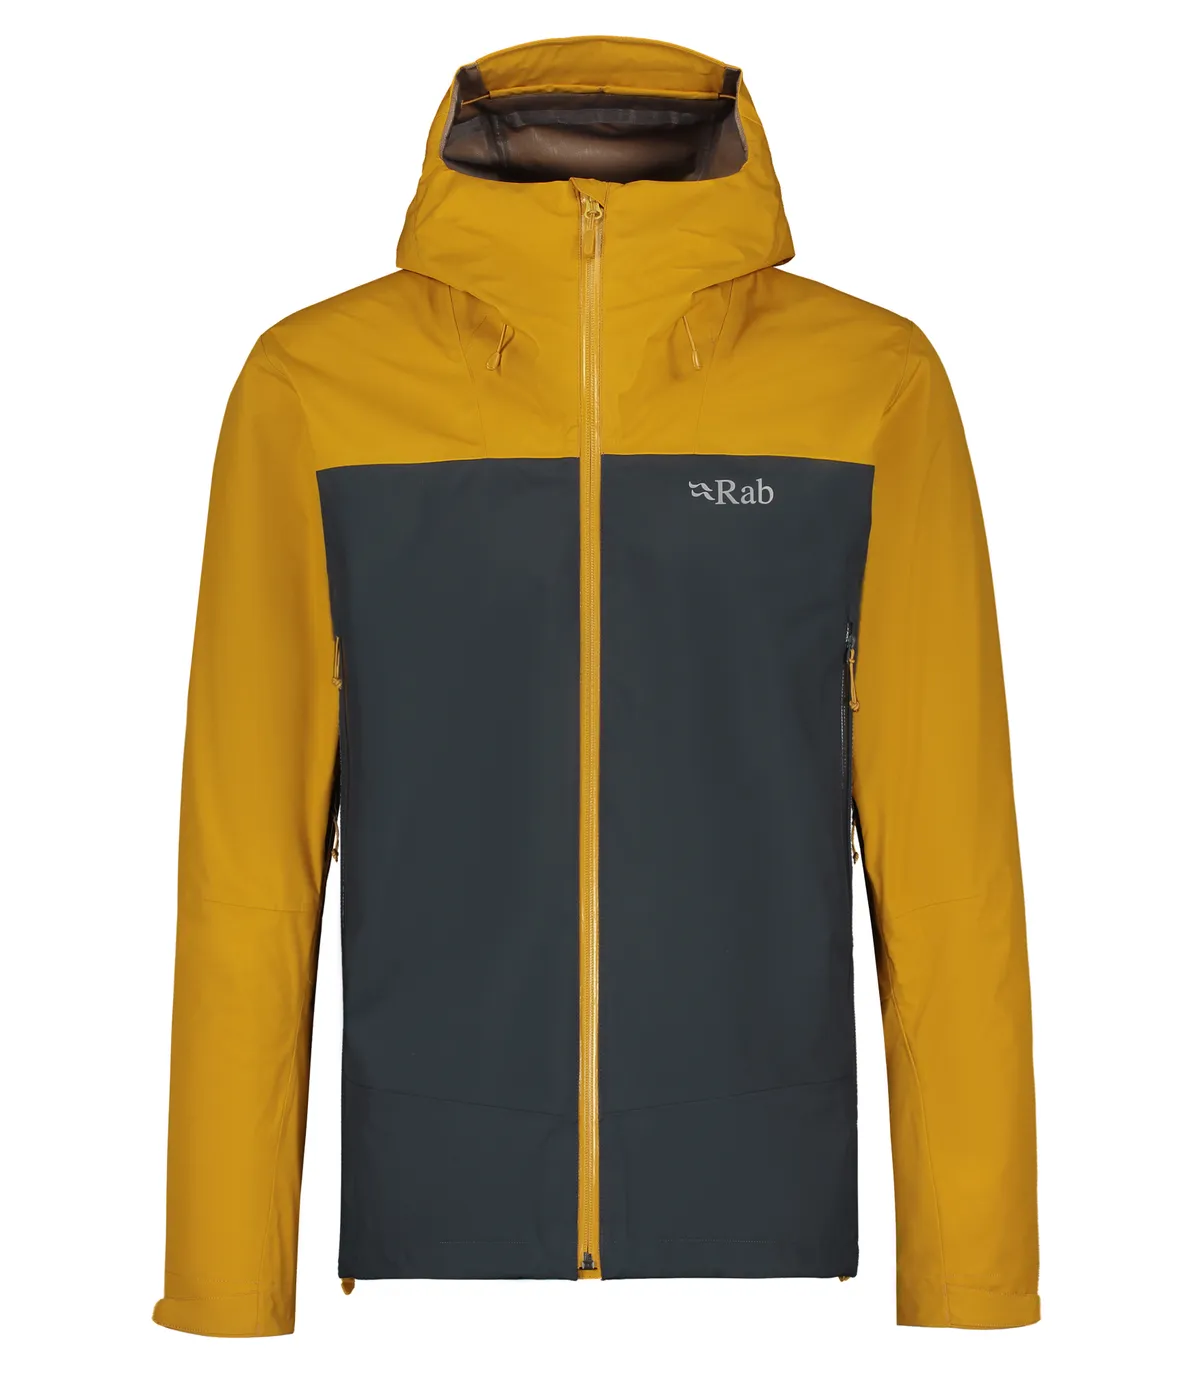 Rab arc eco waterproof hiking jacket in navy blue and gold